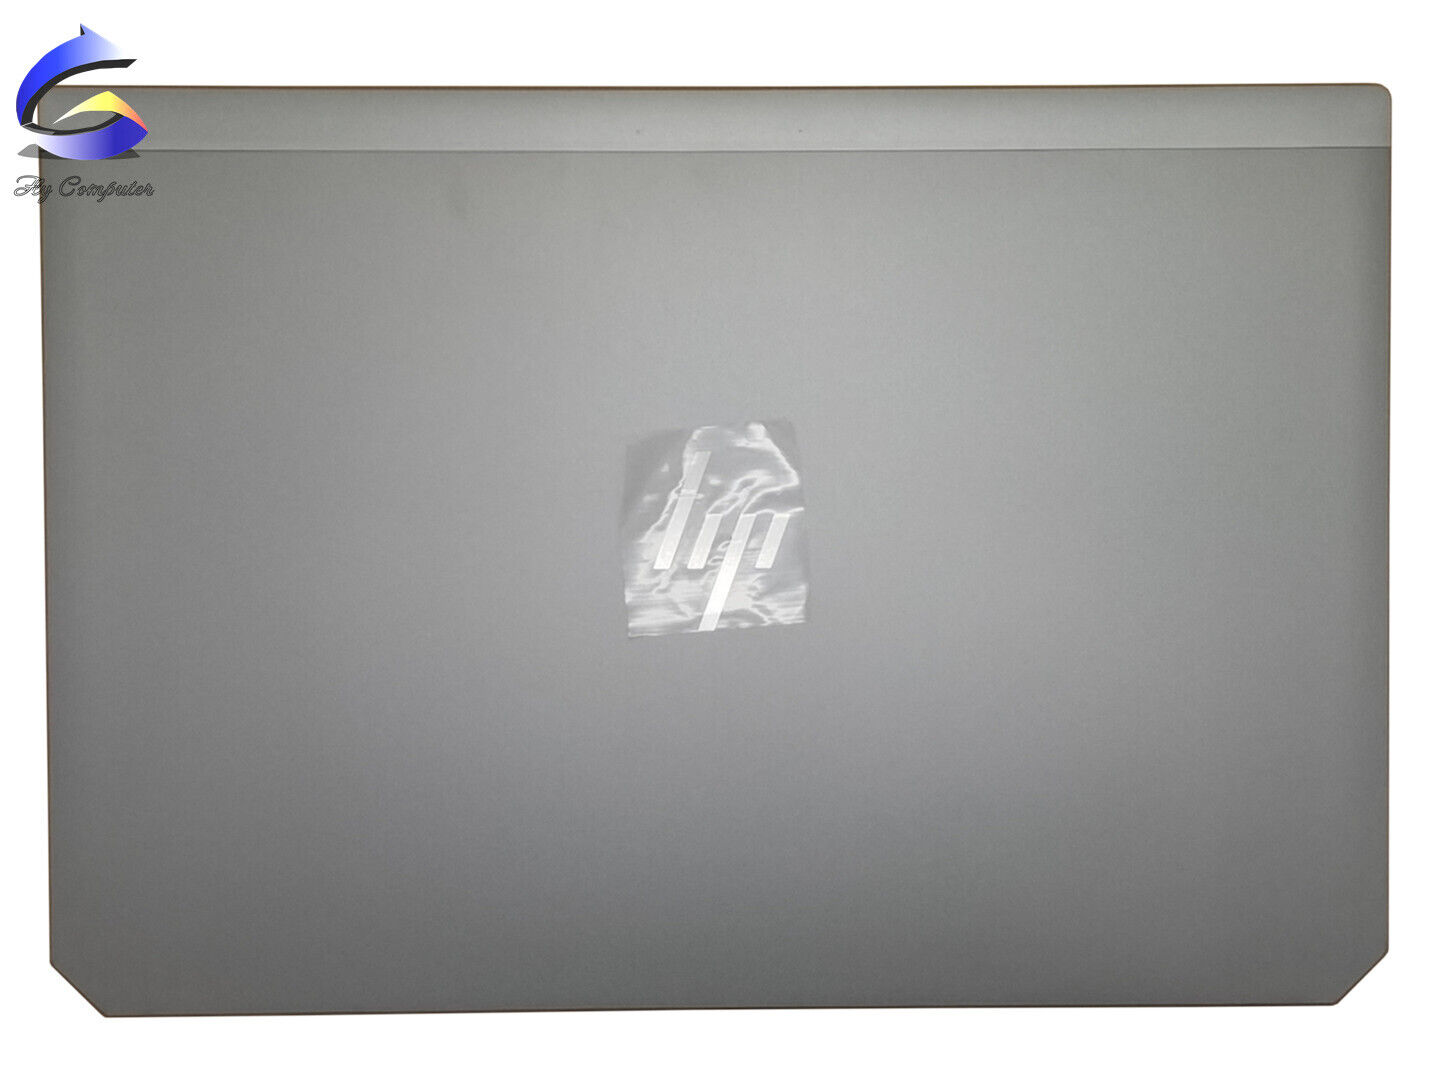 95% New For HP Zbook 15 G5 G6 Laptop LCD Back Top Cover Case Rear Lid L28702-001